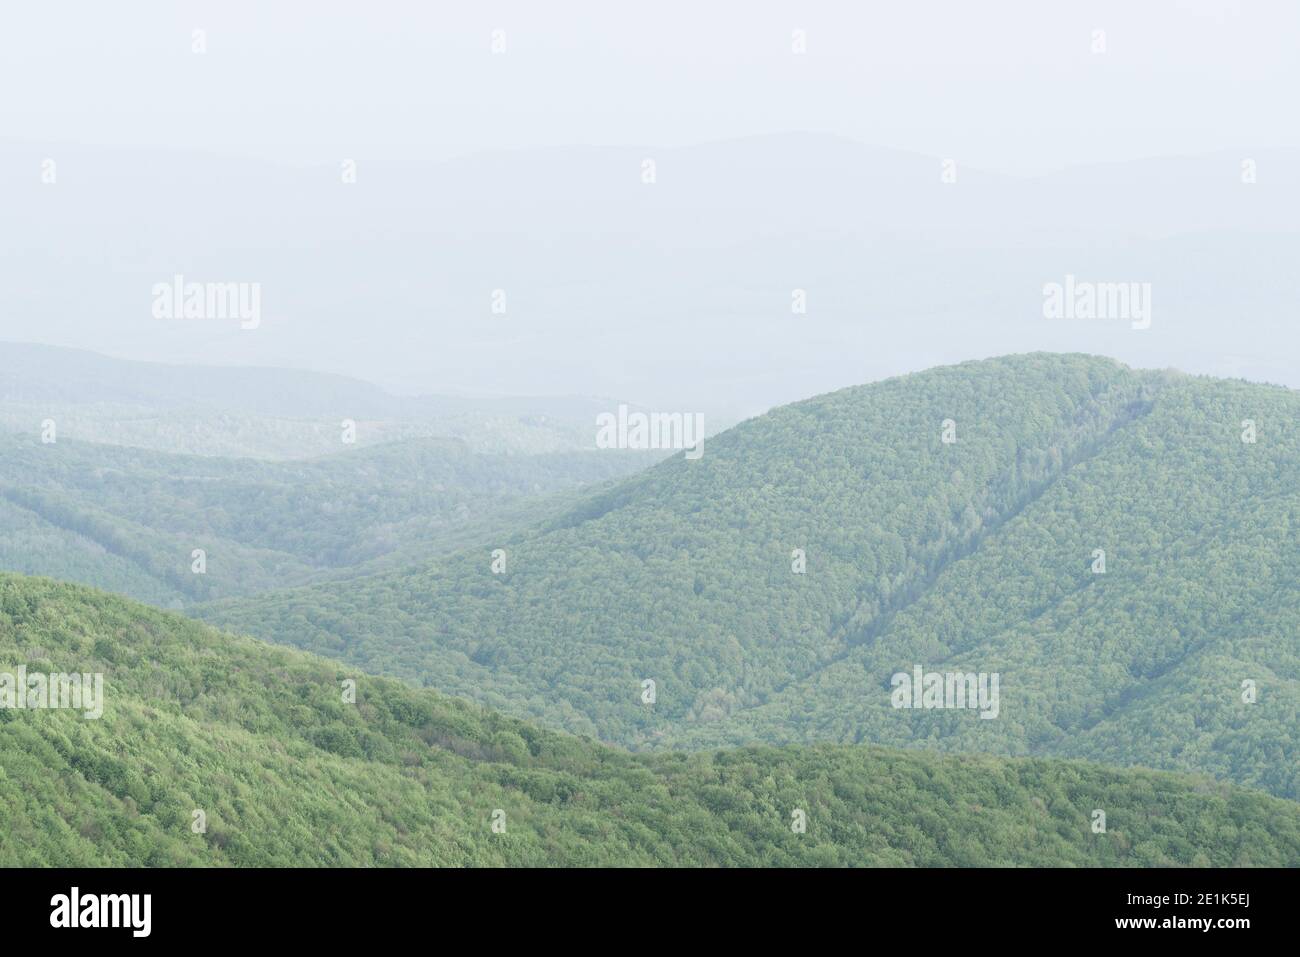 Simple minimalistic spring landscape in light green pastel colors and haze in the mountains Stock Photo